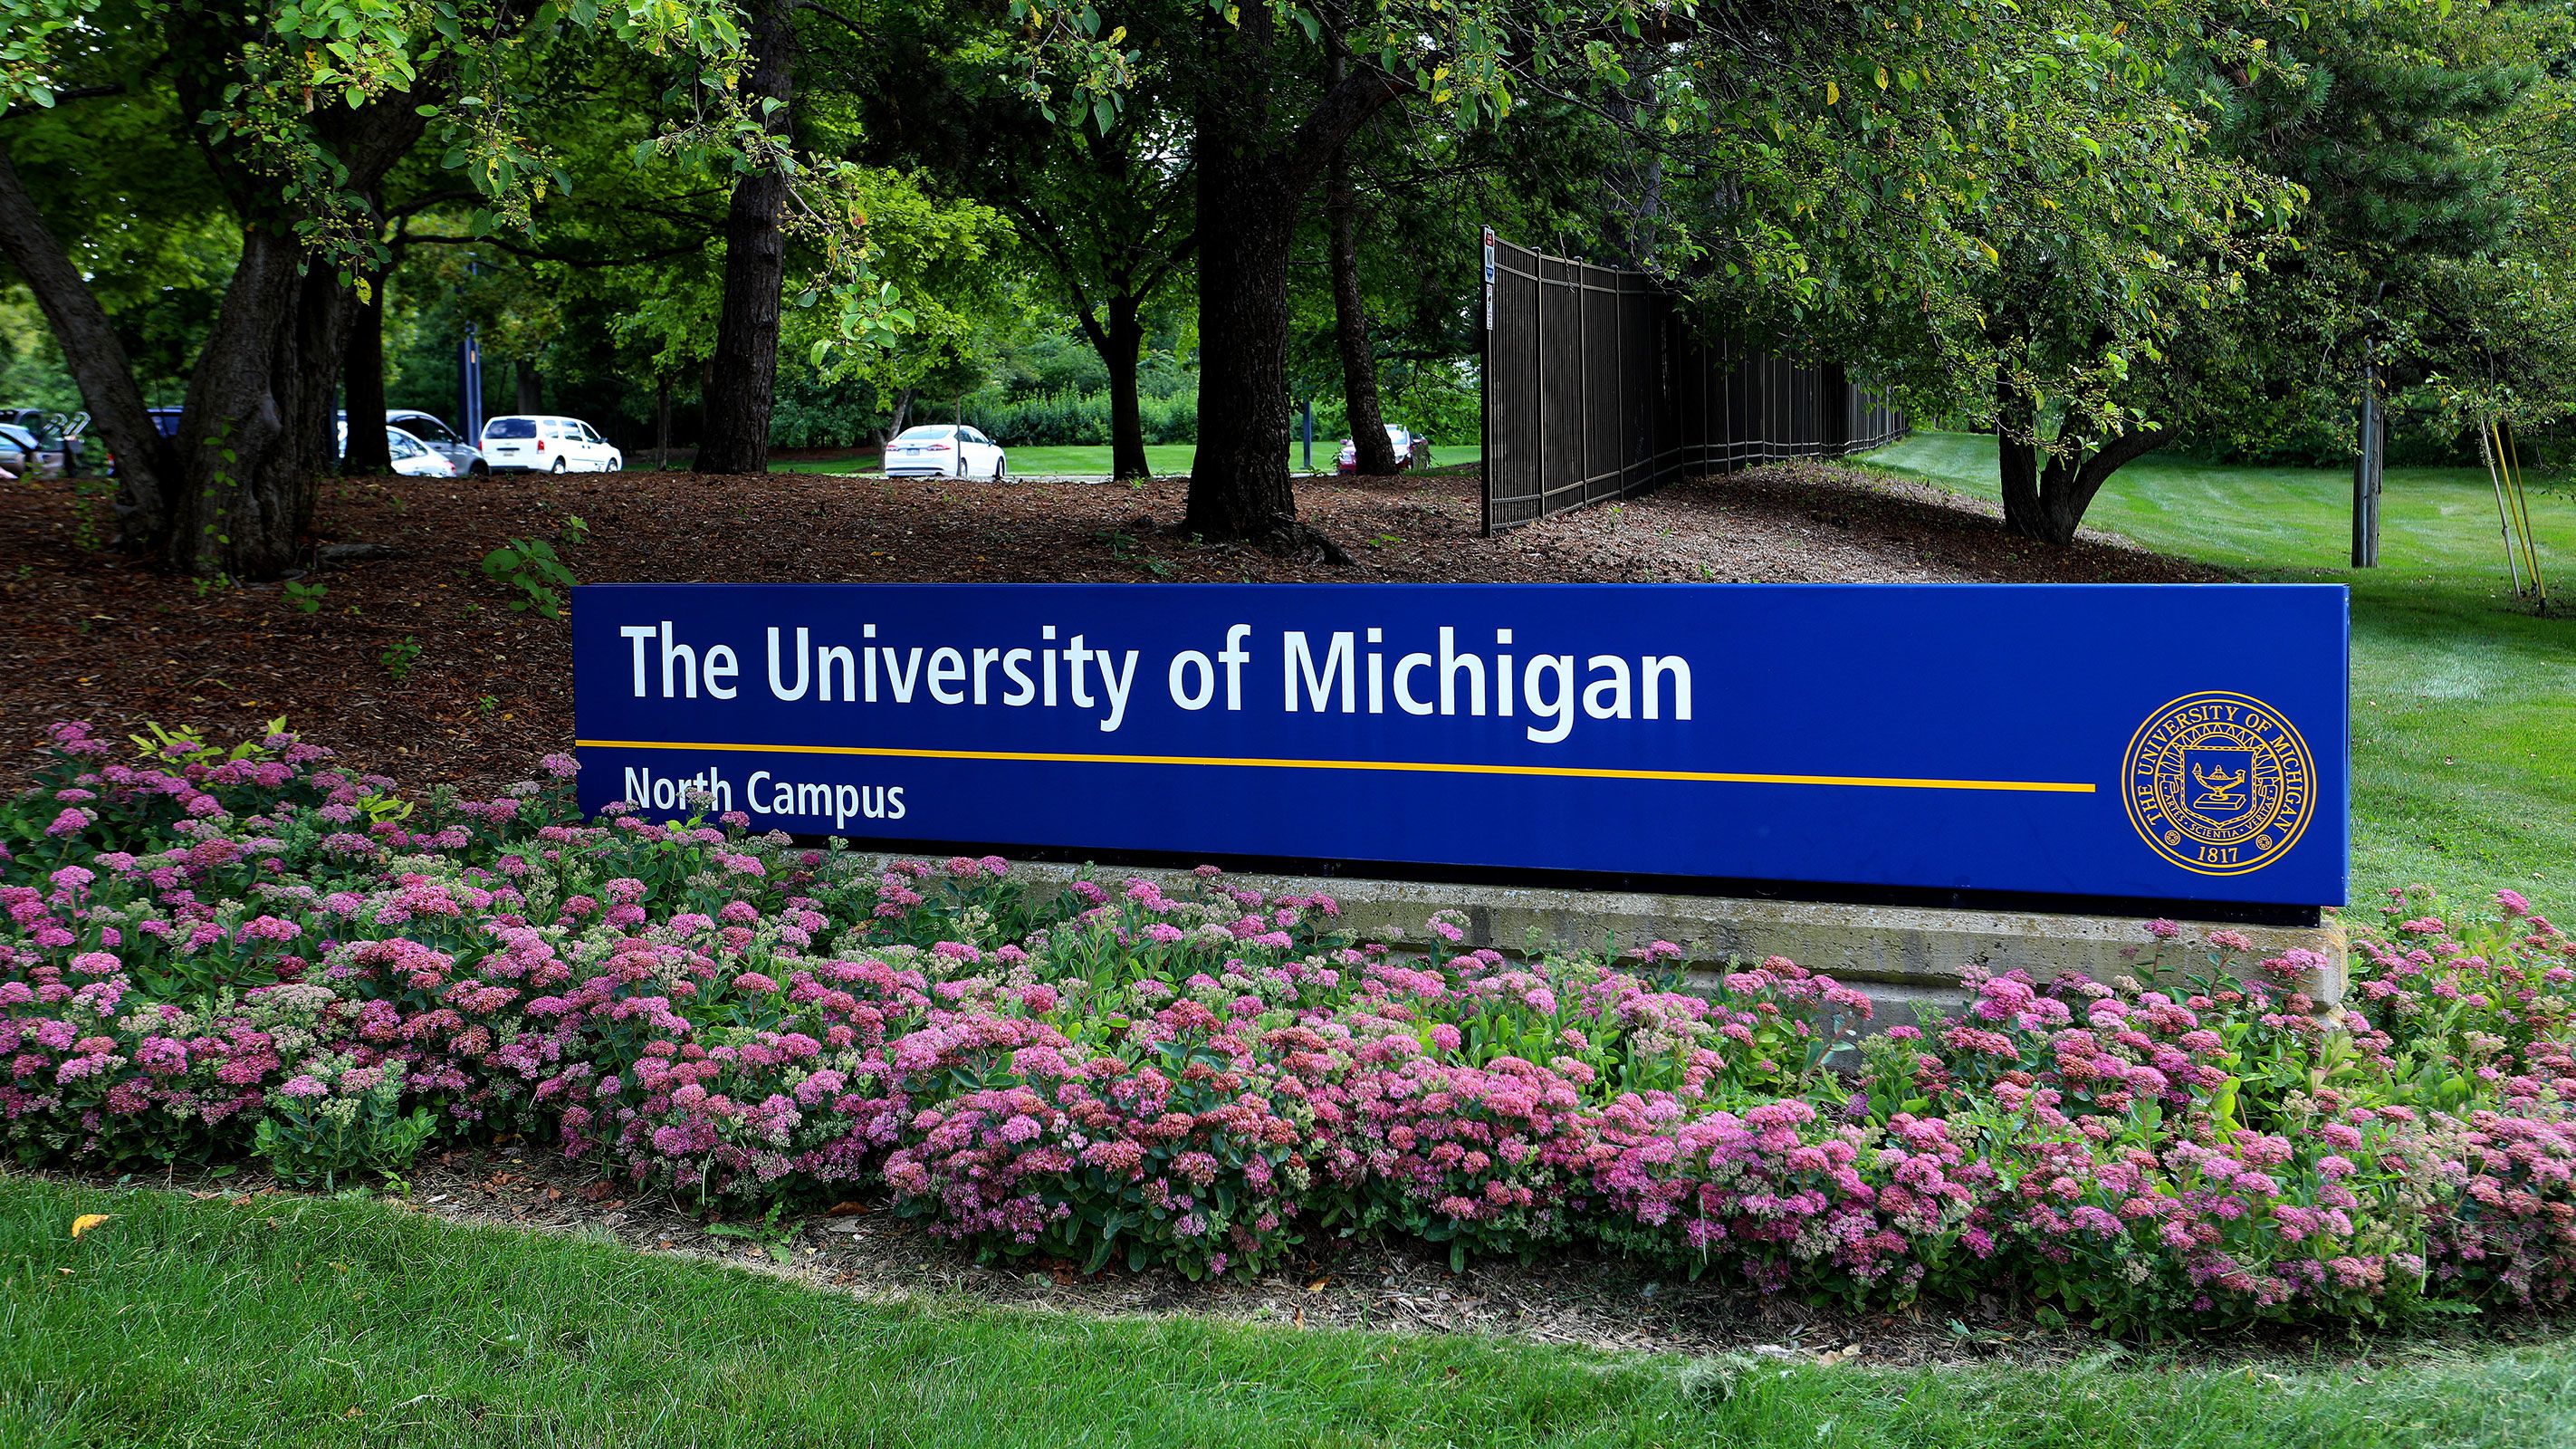 University of Michigan School of Information - Just like with